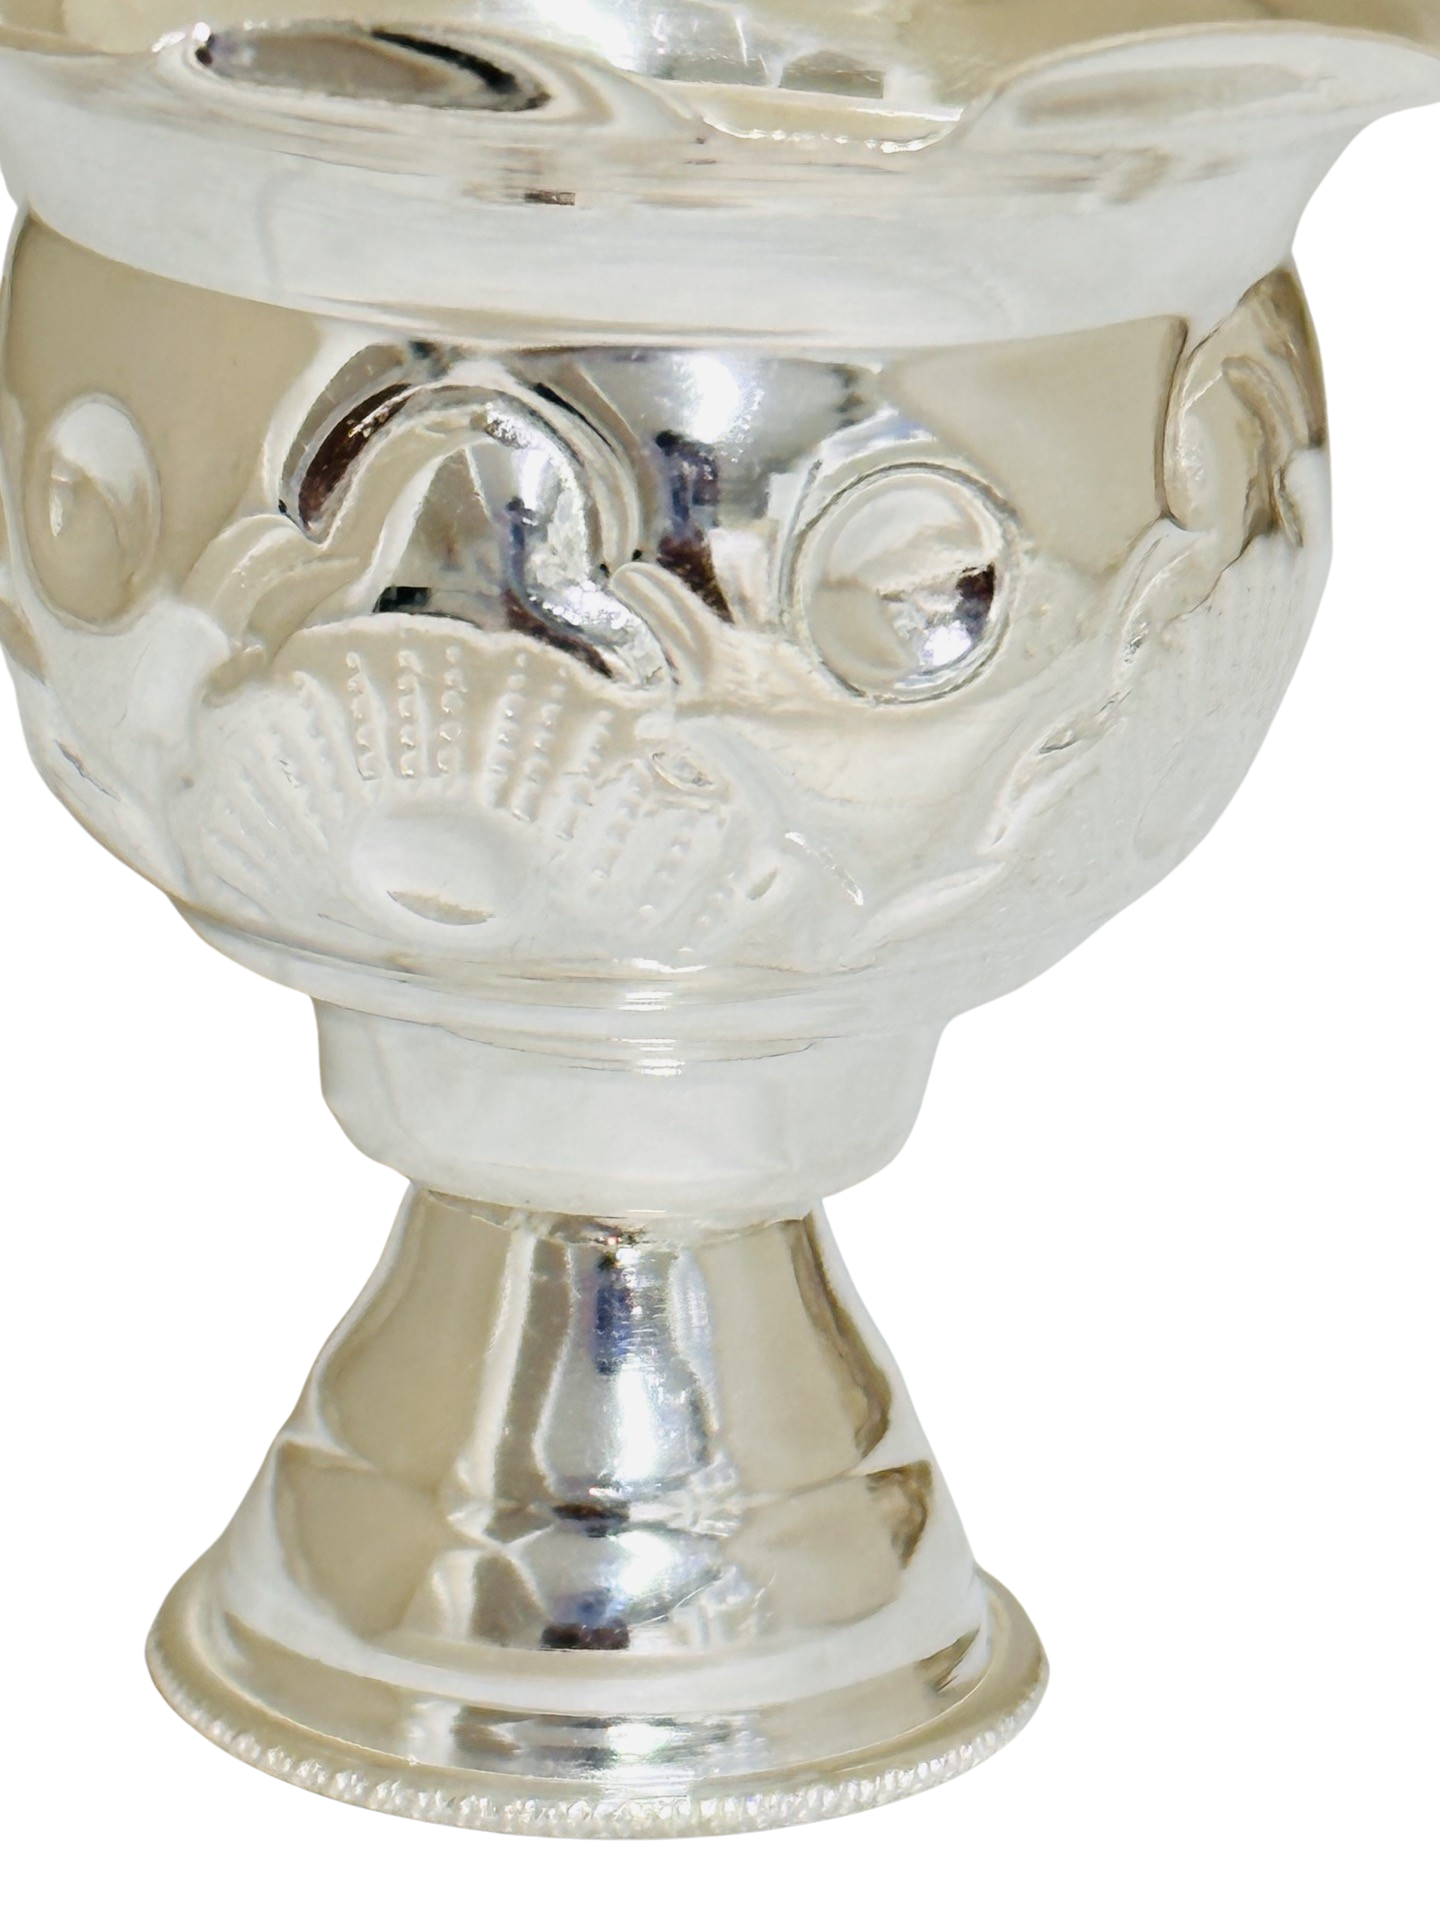 925 Silver Floral Chandan Cup